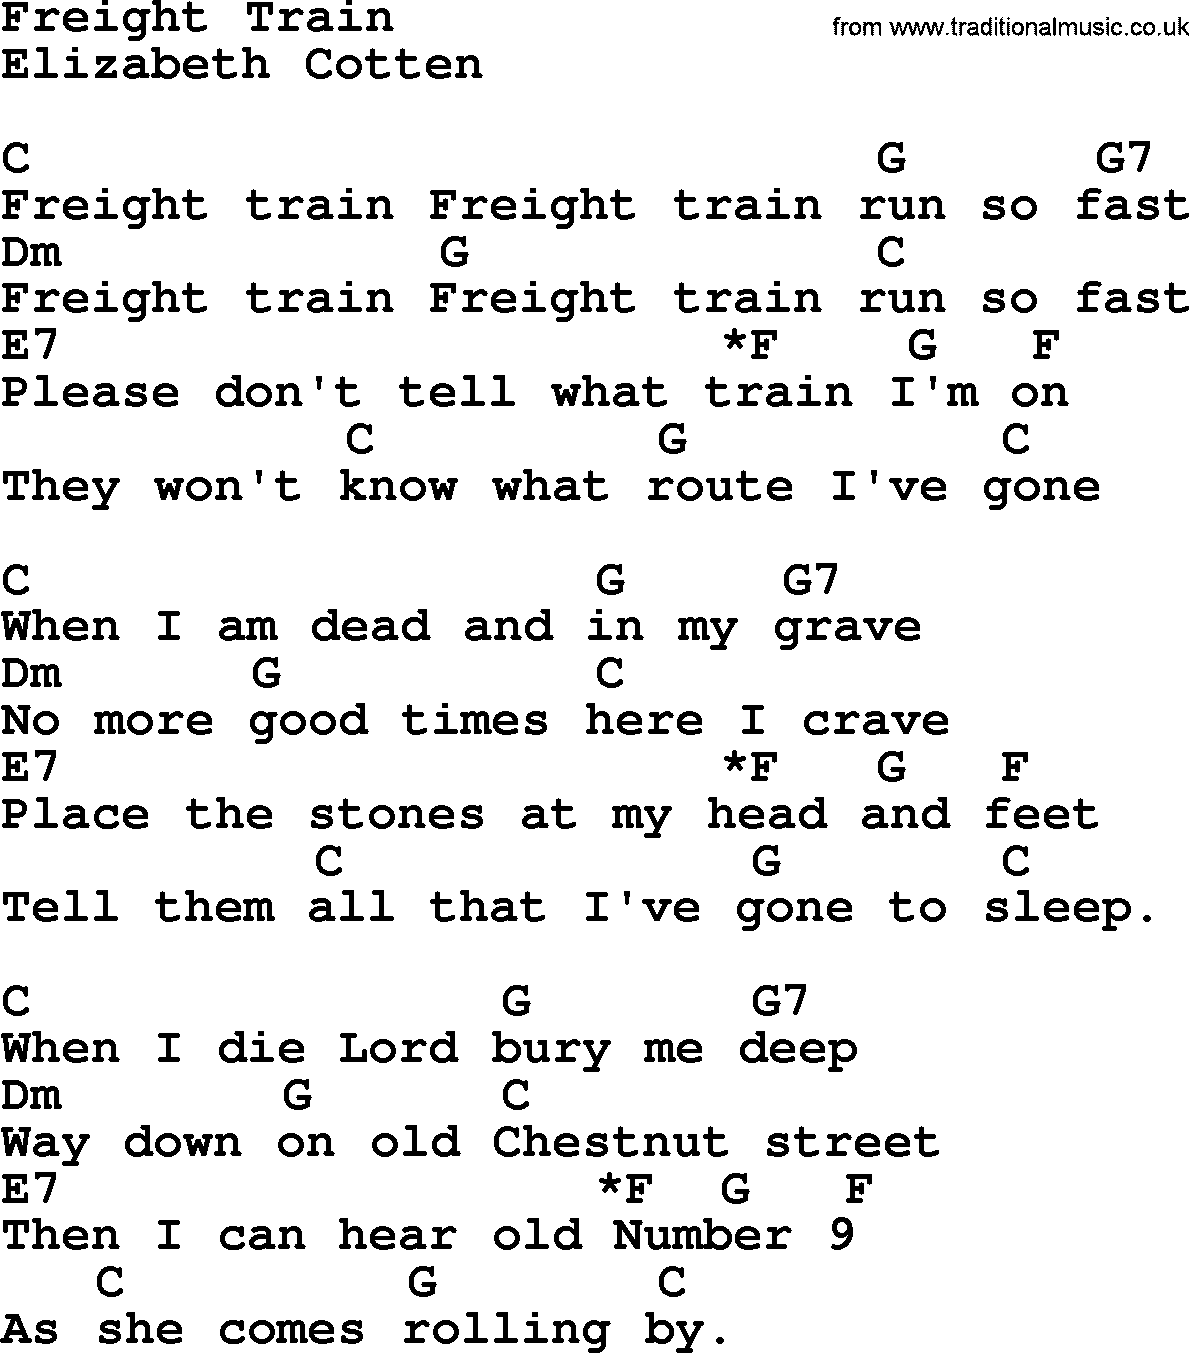 Top 1000 Most Popular Folk and Old-time Songs: Freight Train, lyrics and chords